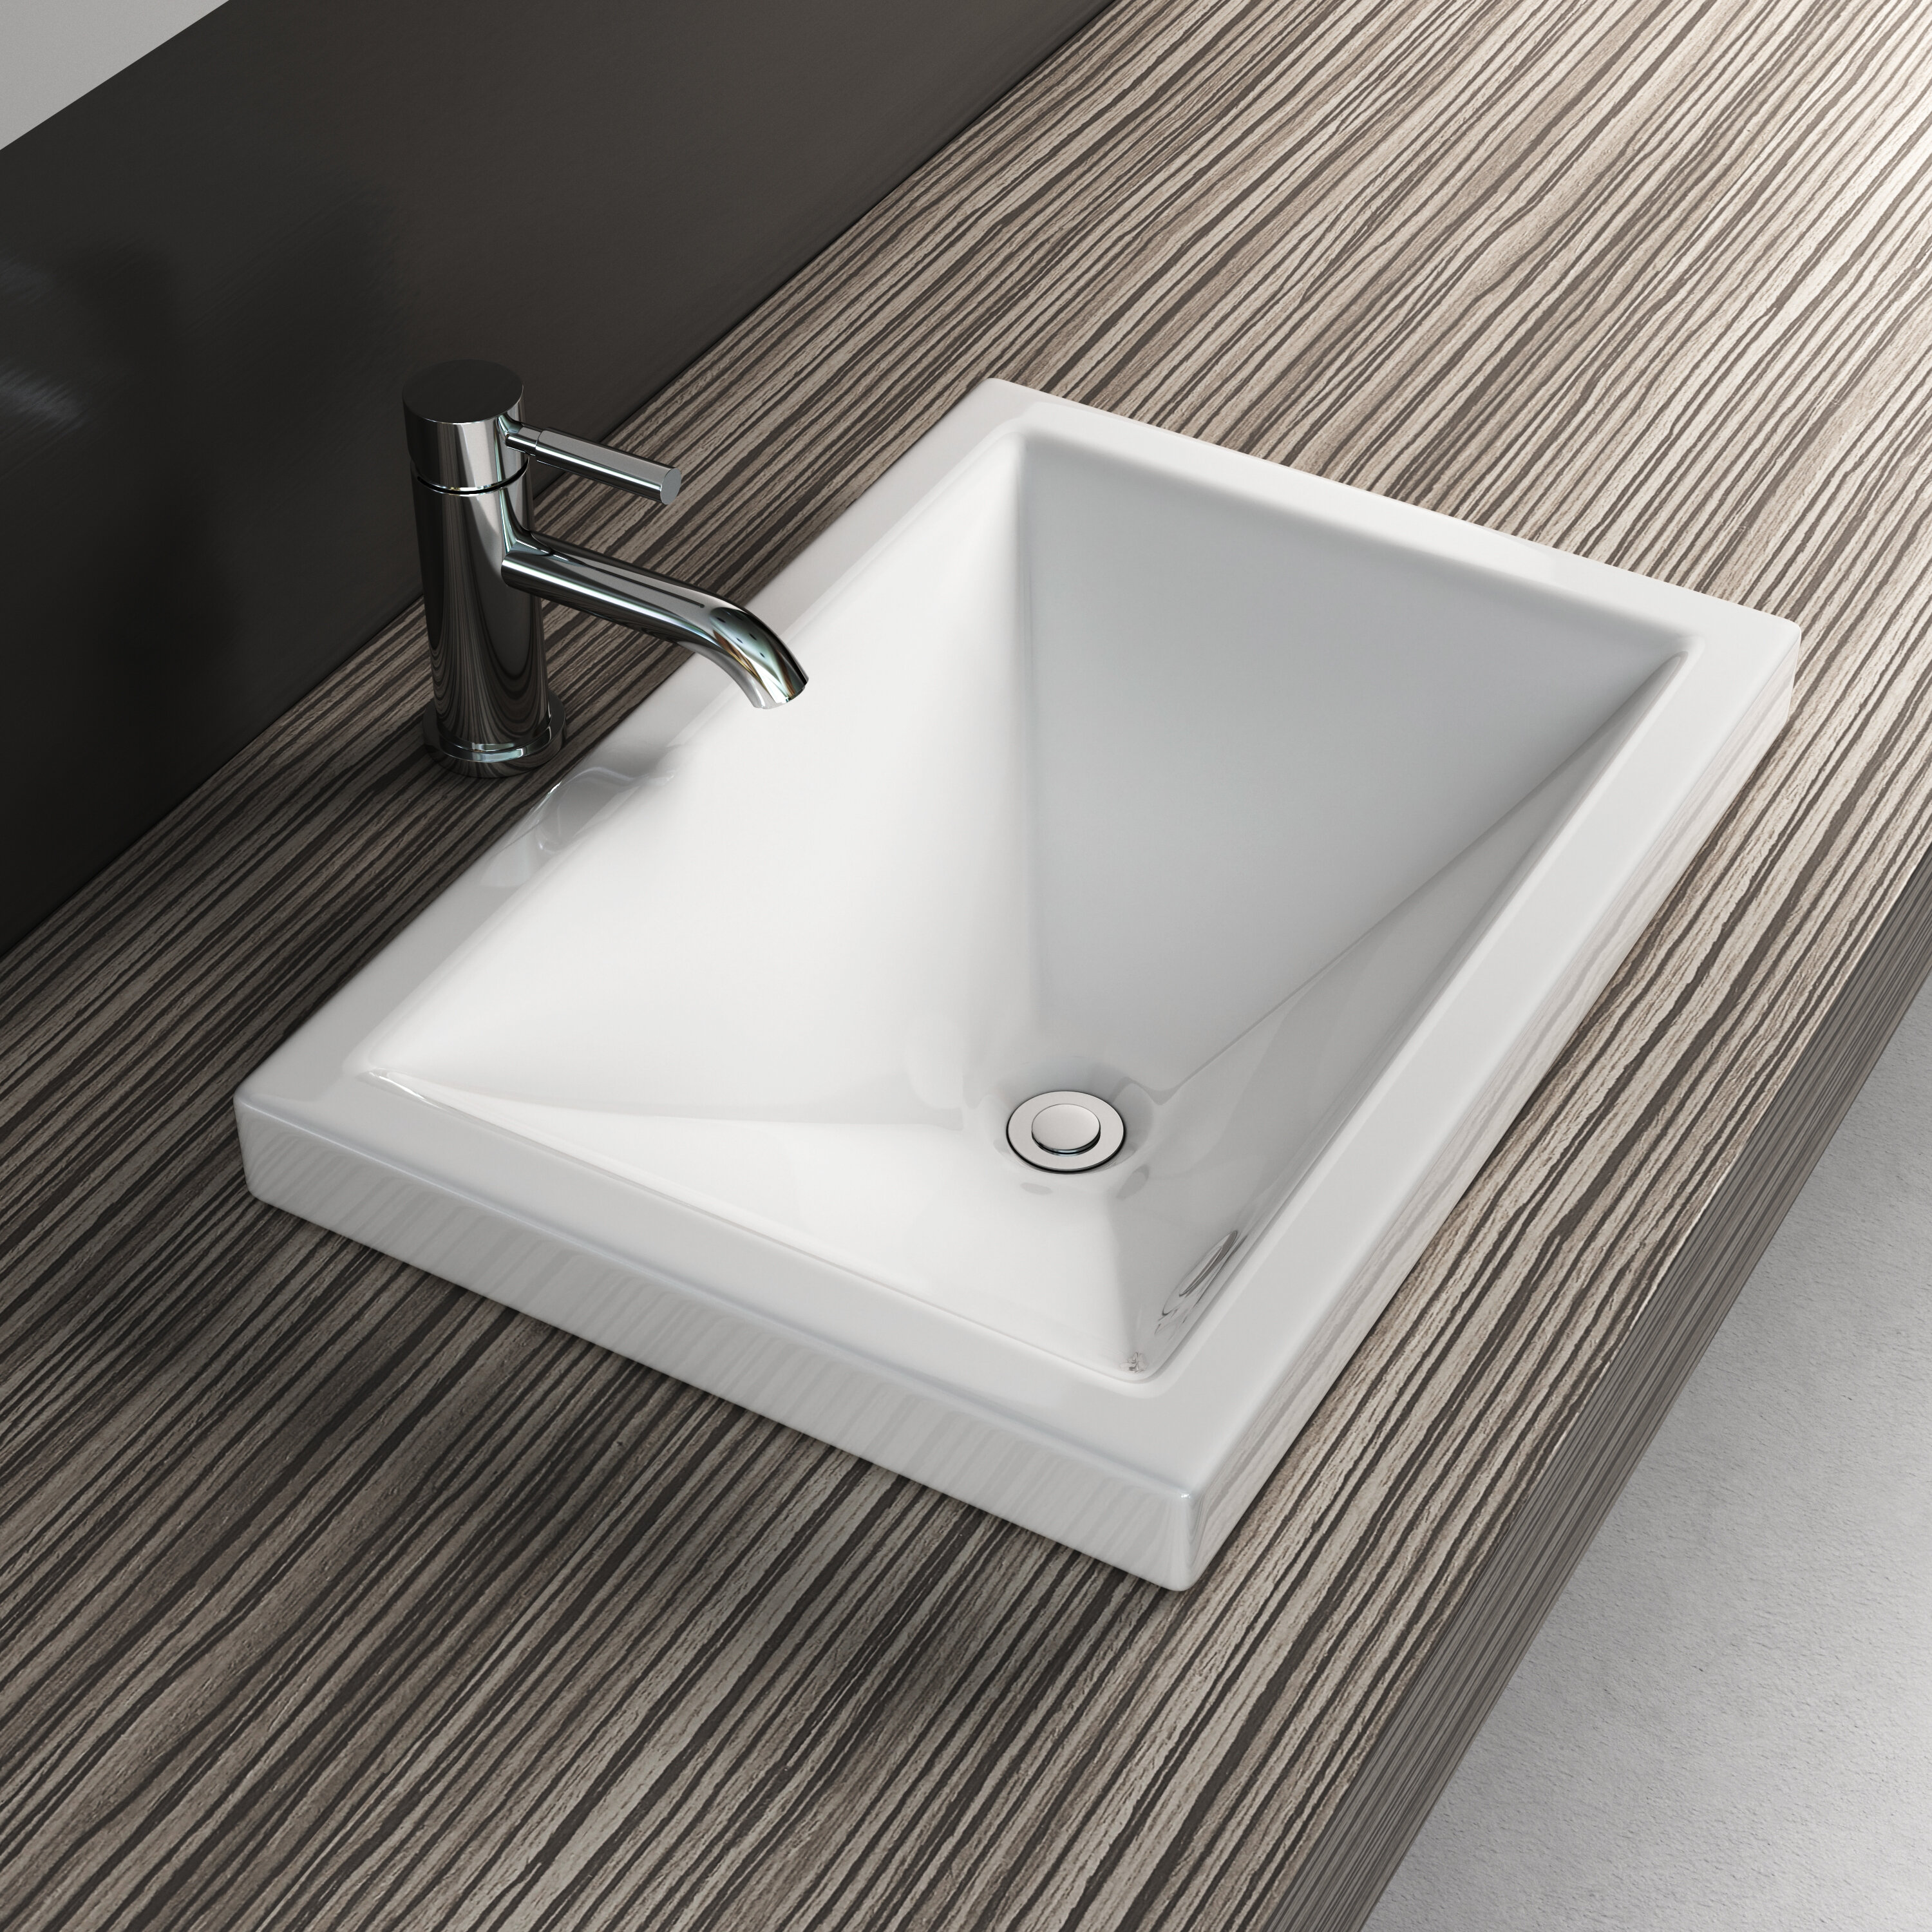 Cantrio Koncepts Vitreous China Rectangular Drop In Bathroom Sink With Overflow Reviews Wayfairca